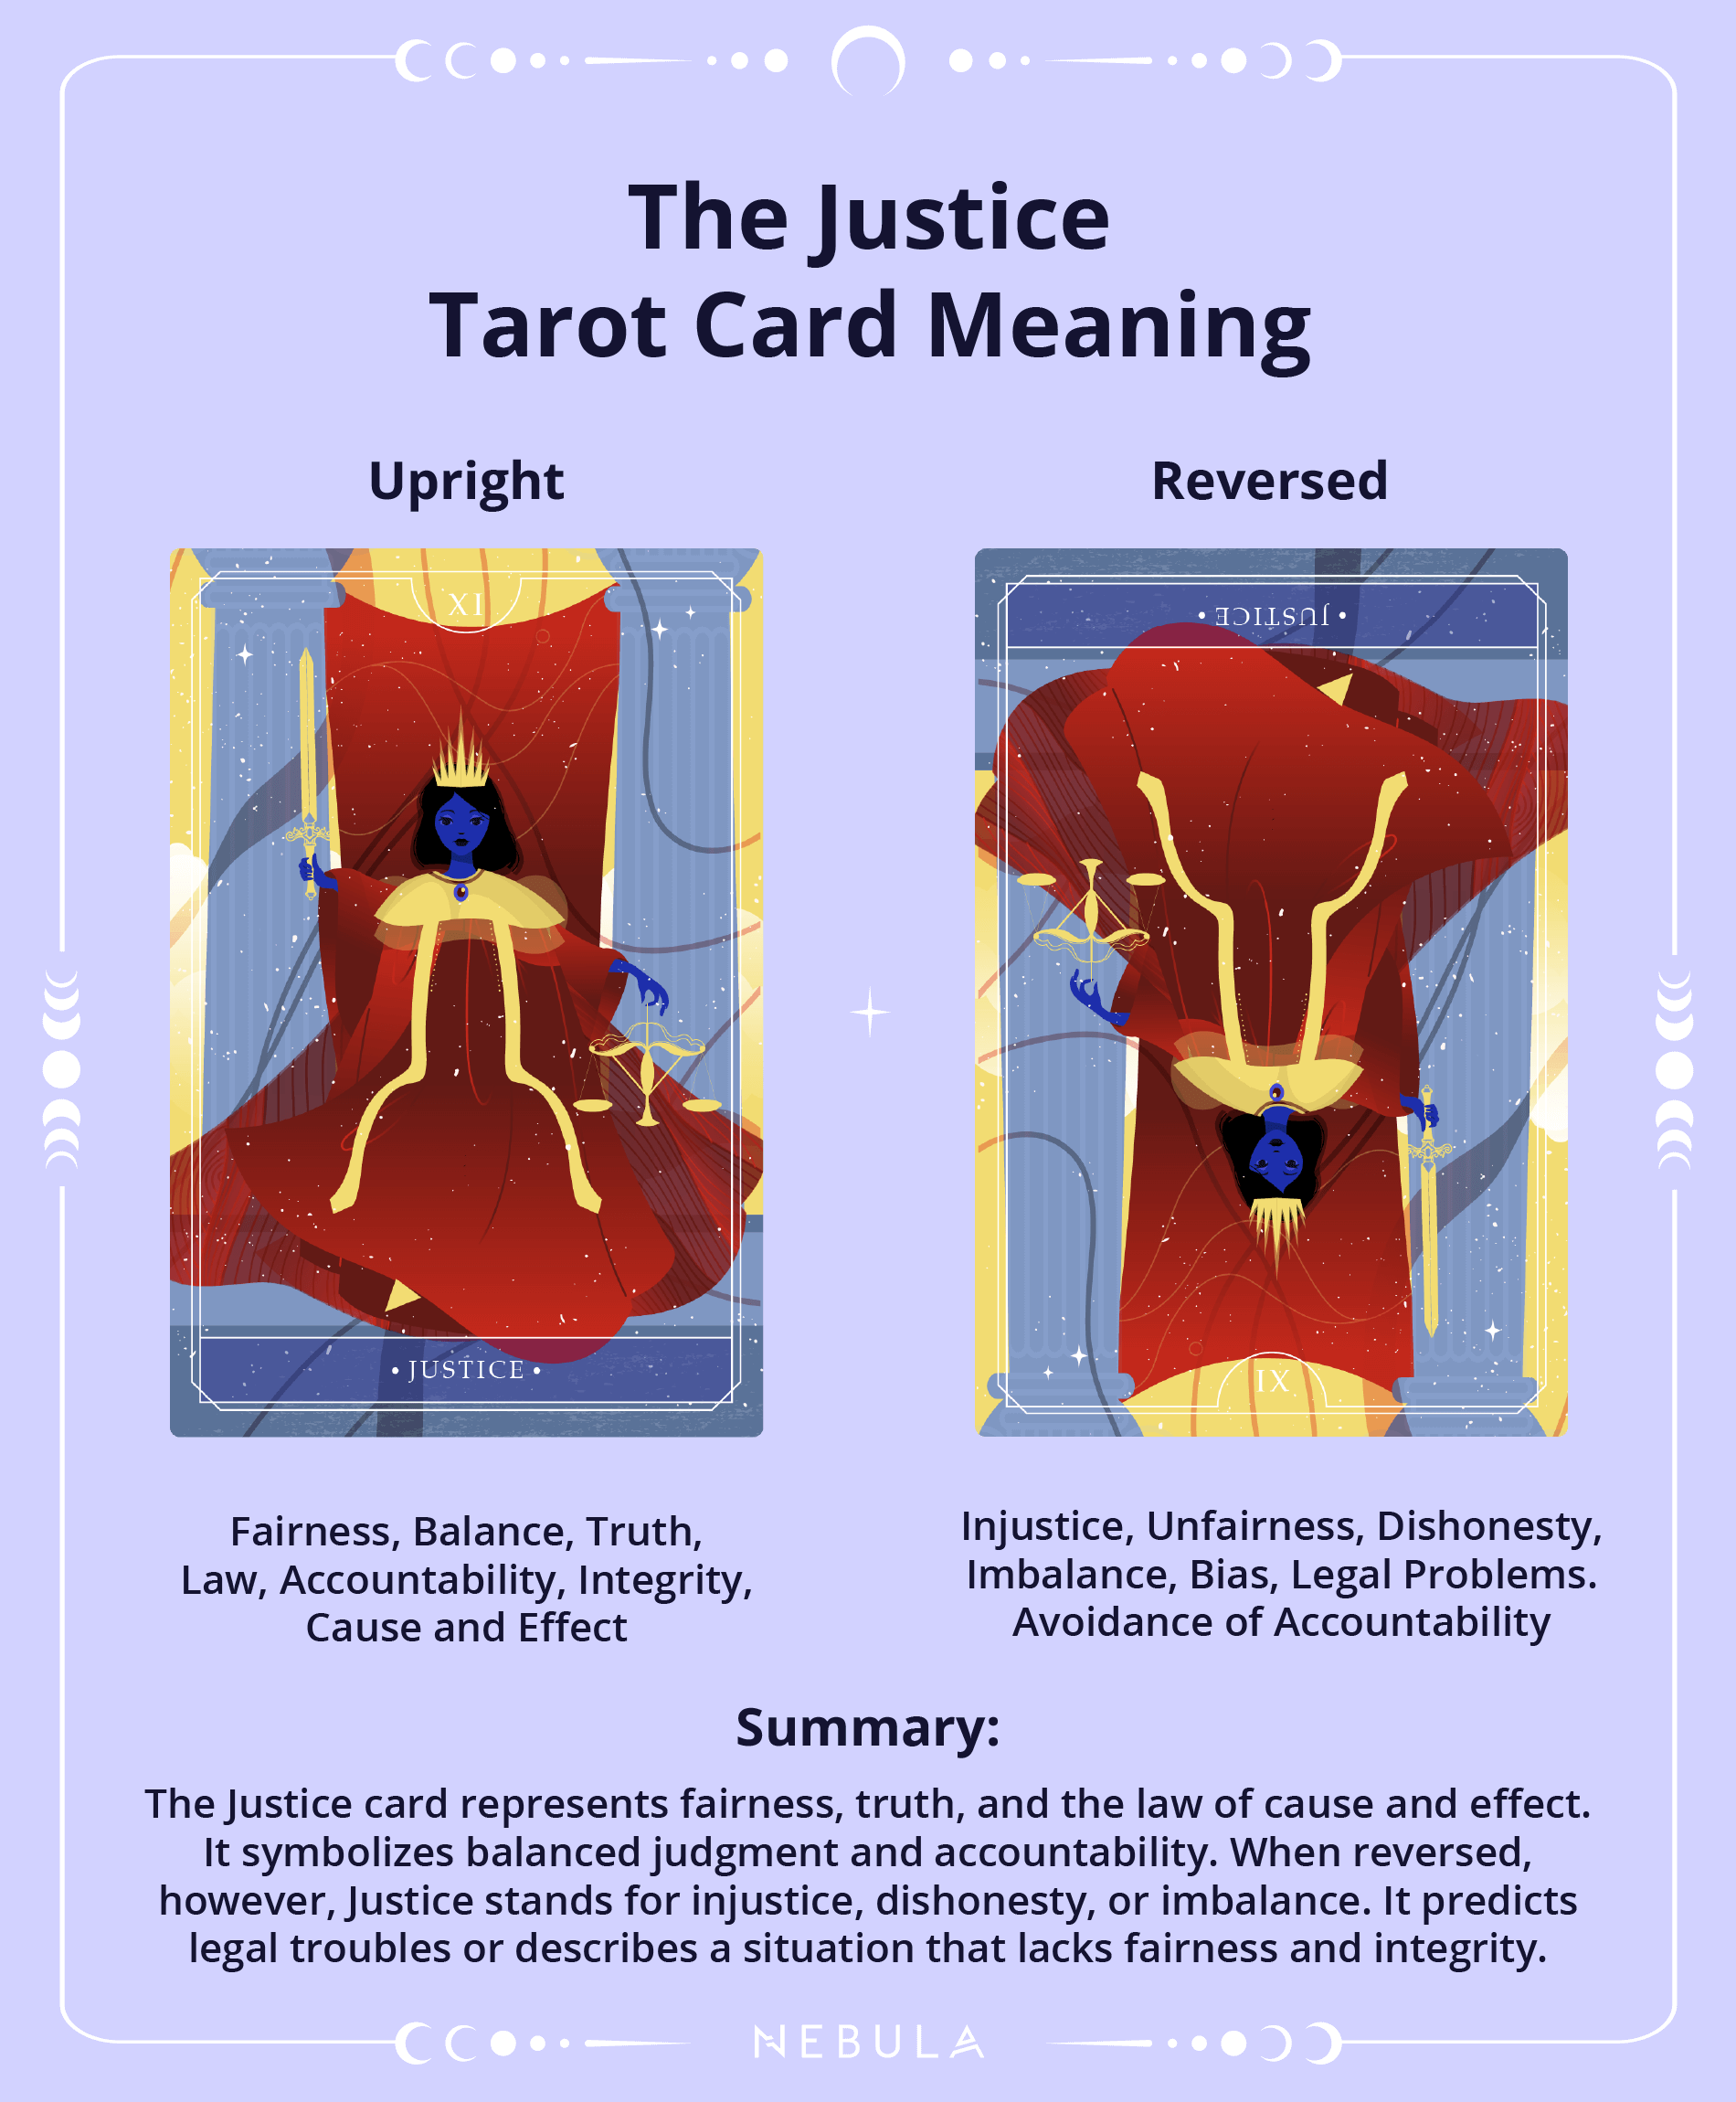 The Justice Tarot Card Meaning